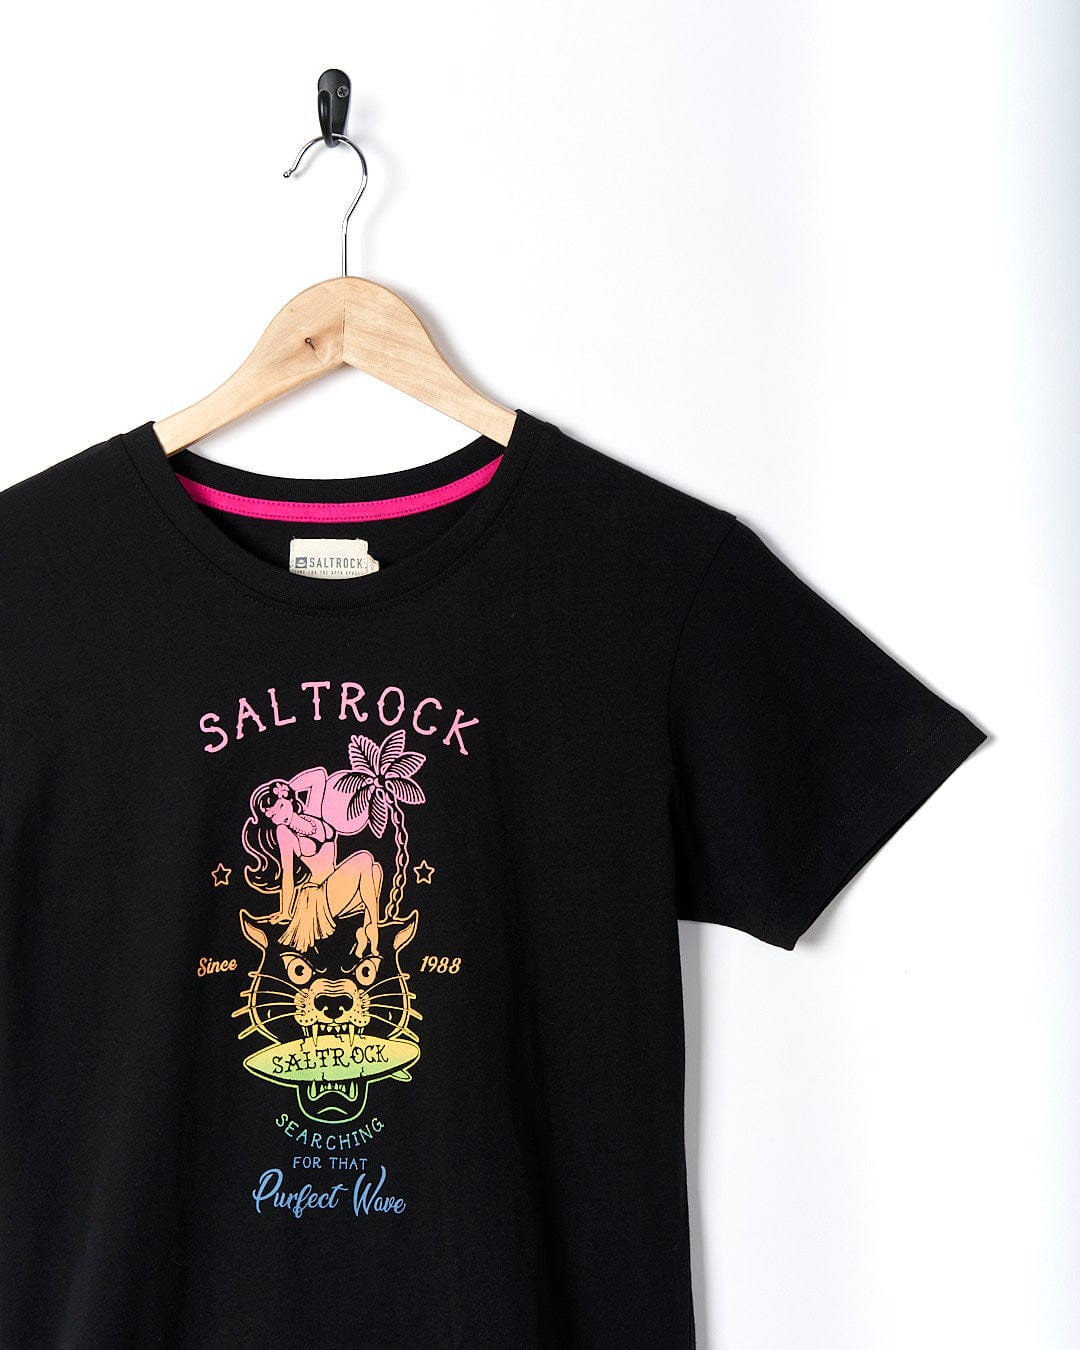 A Purfect Wave Gradient - Womens Short Sleeve T-Shirt - Black with the brand name Saltrock on it.